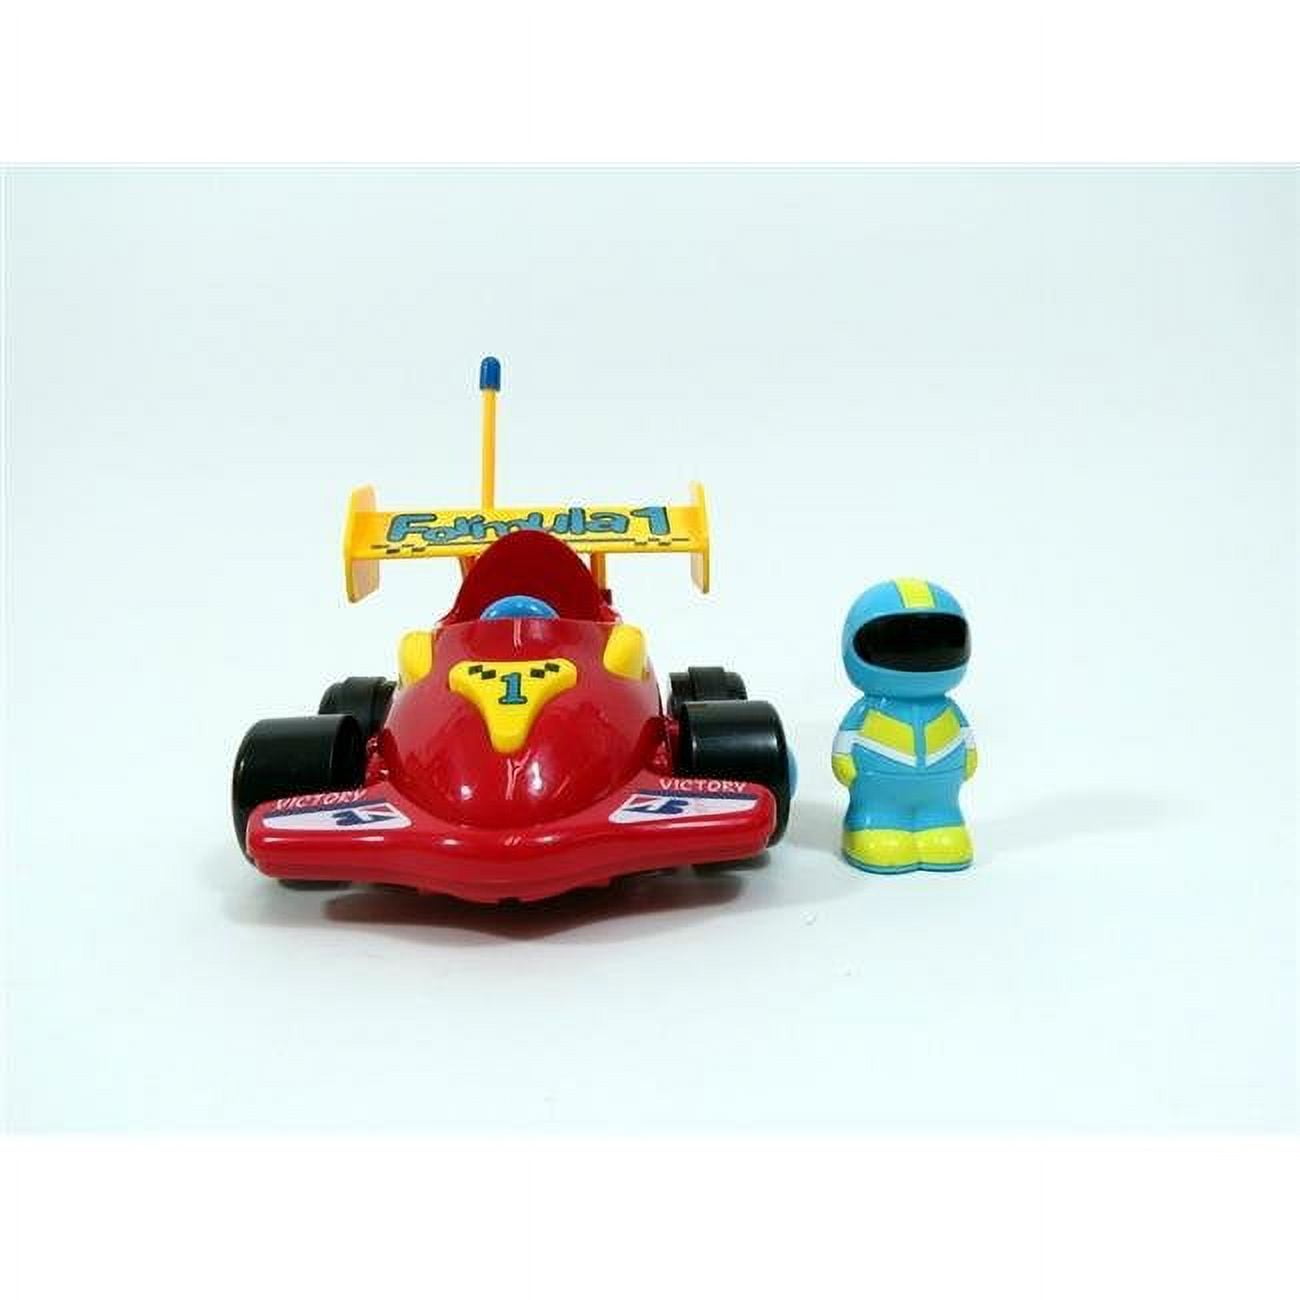 Picture of Azimport MC03R 4 in. Cartoon R & C Formula Race Car Toy for Toddler - Red